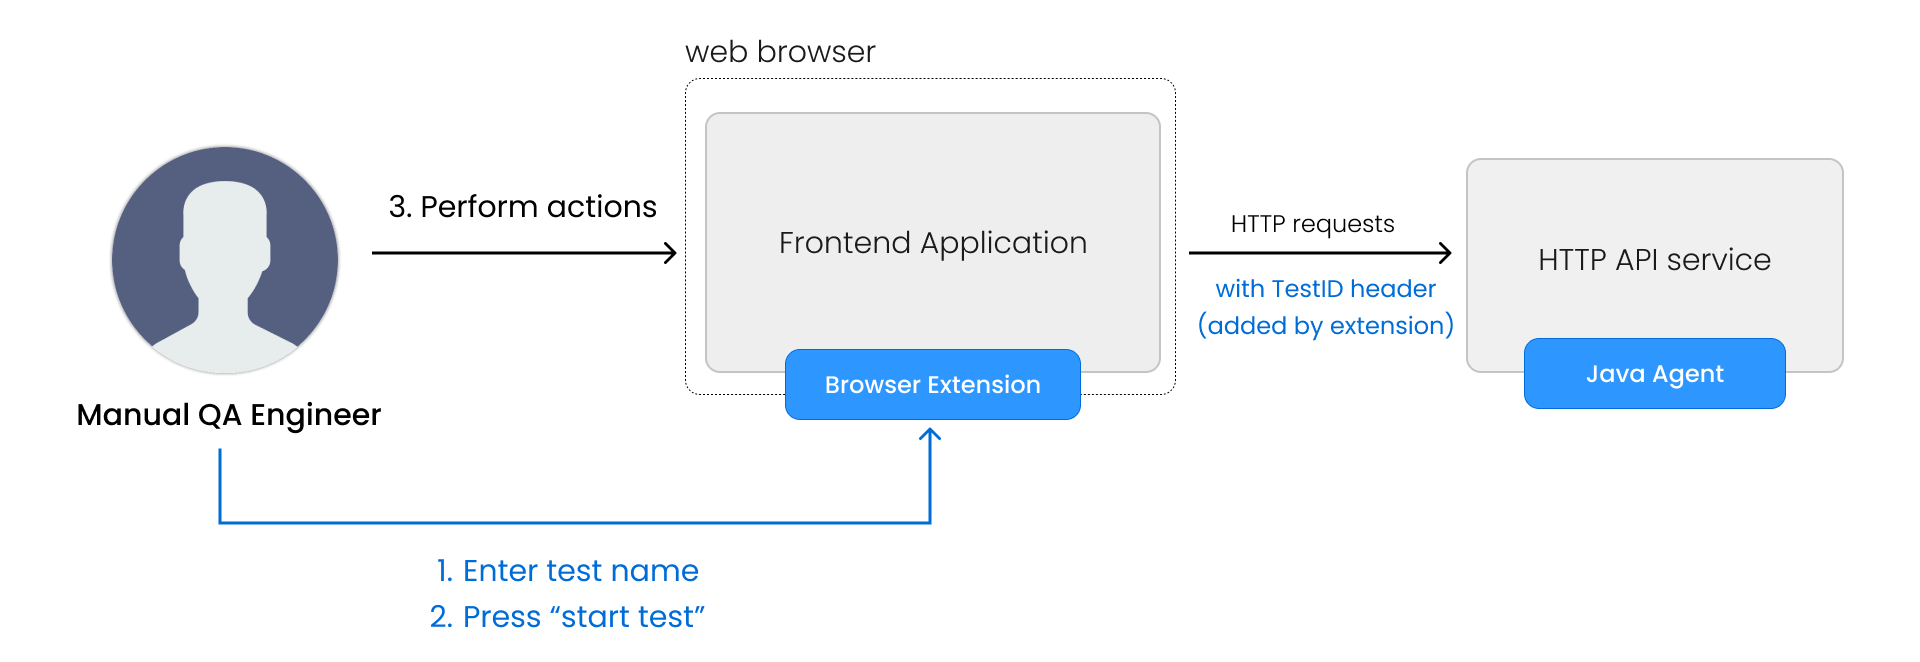  A diagram depicting: - Manual QA Engineer performing actions on Frontend Application in Web Browser. - backend HTTP API service handling requests - additional 'Browser Extension' entity is attached to the web browser 